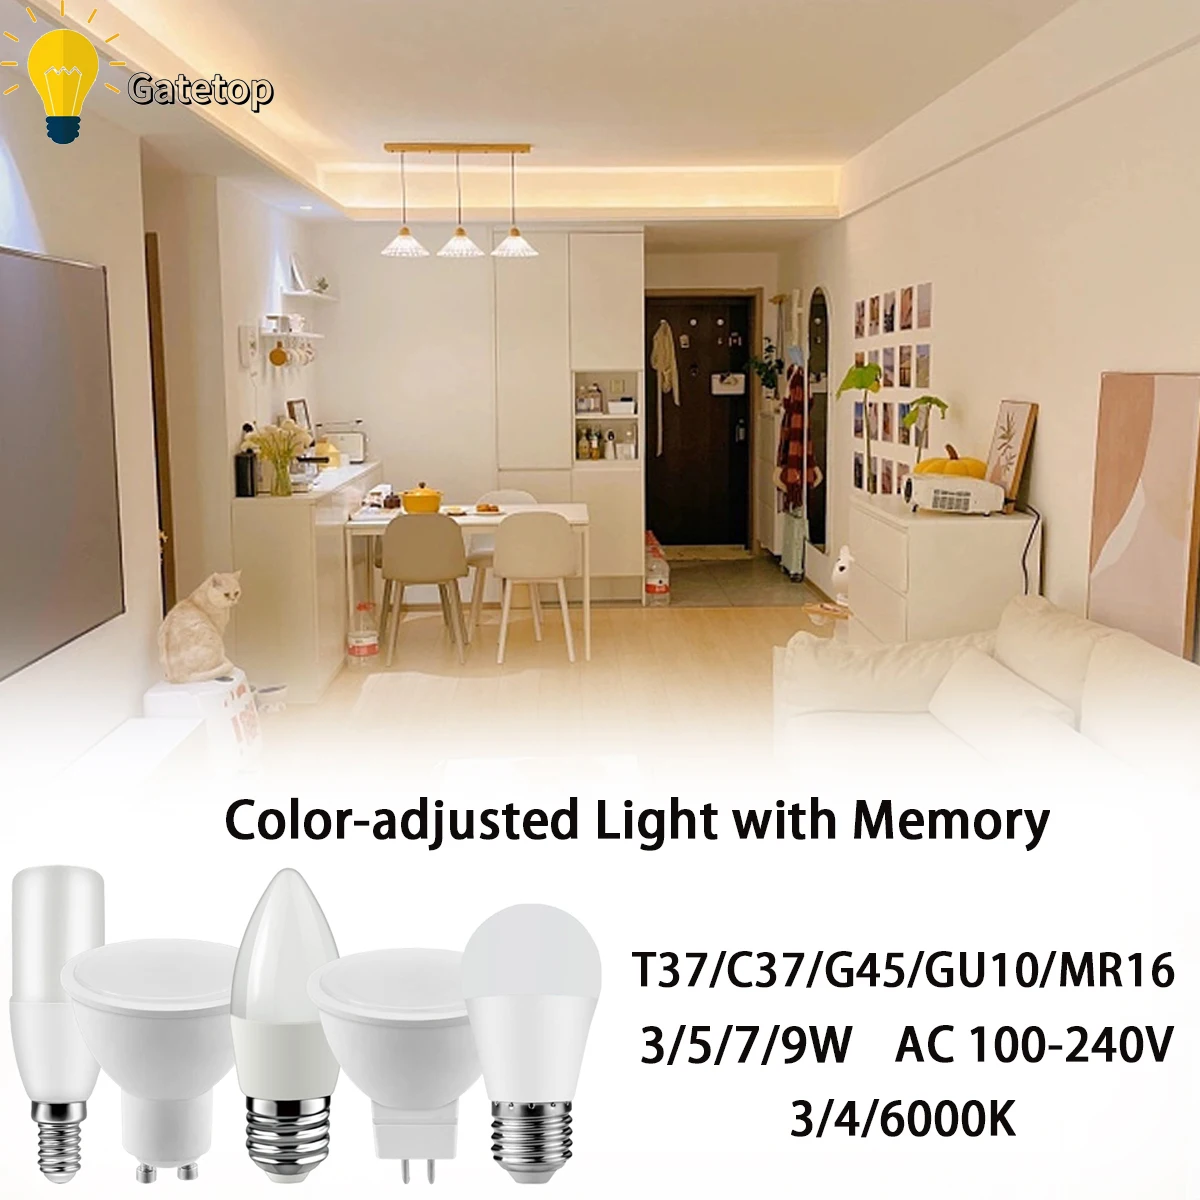 

New Style LED Smart Bulb 3 Color-Adjusted with Memory 2PCS 3W-7W AC100-240V B22 E27 E14 High light efficiency without flicker